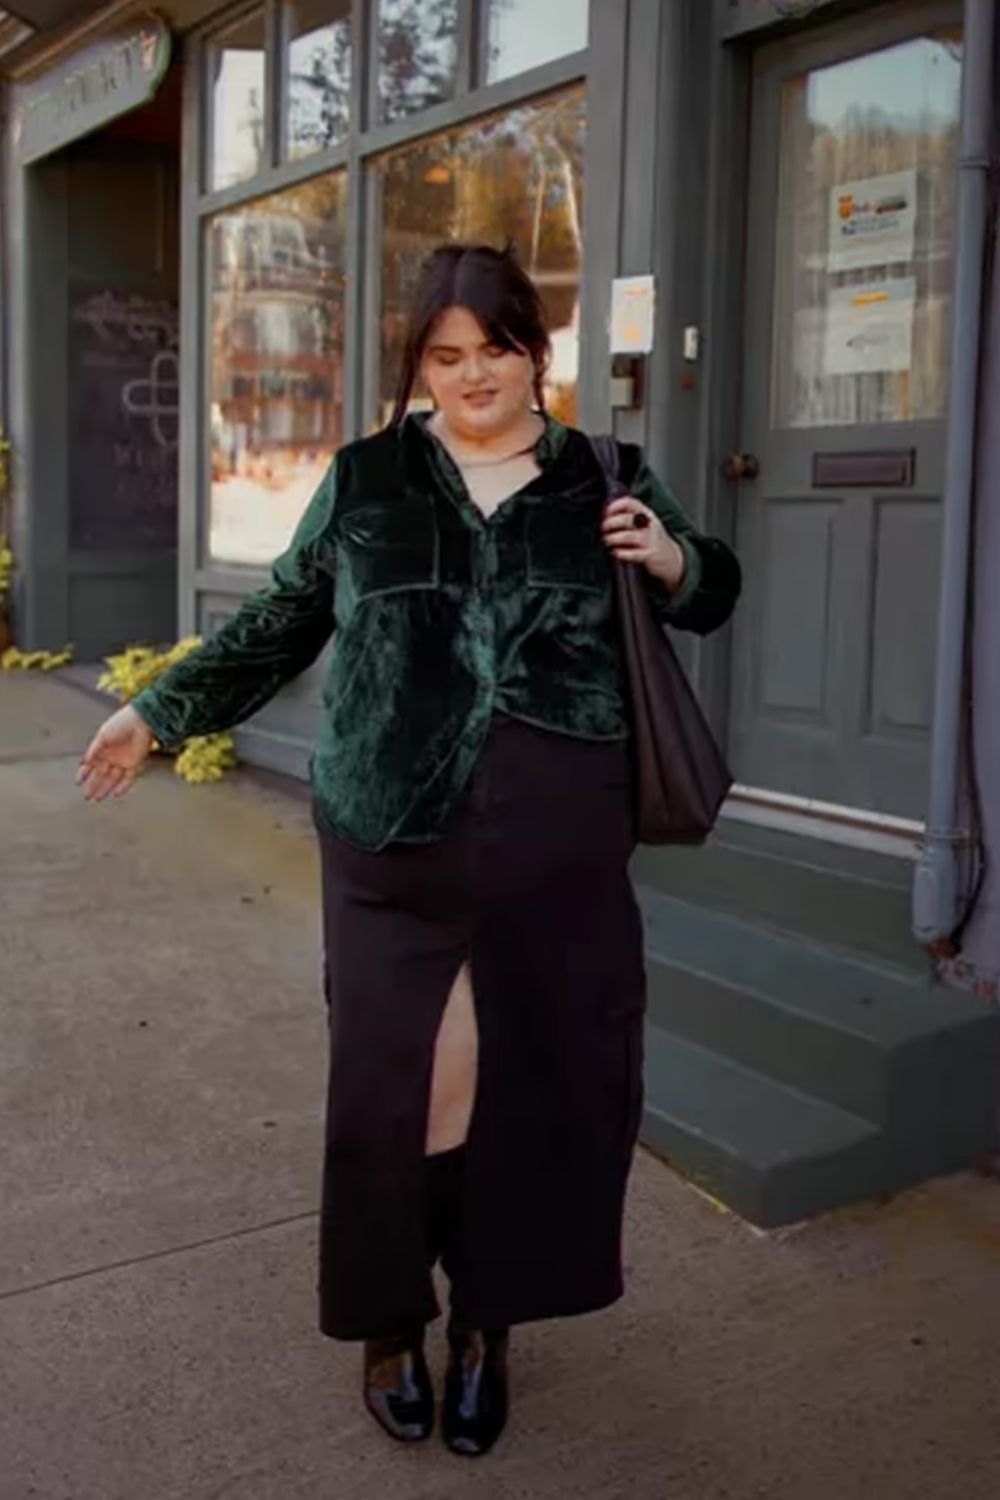 This ensemble strikes a balance with a textured green jacket, wide-leg pants, and a fitted top, offering a trendy yet sophisticated silhouette.